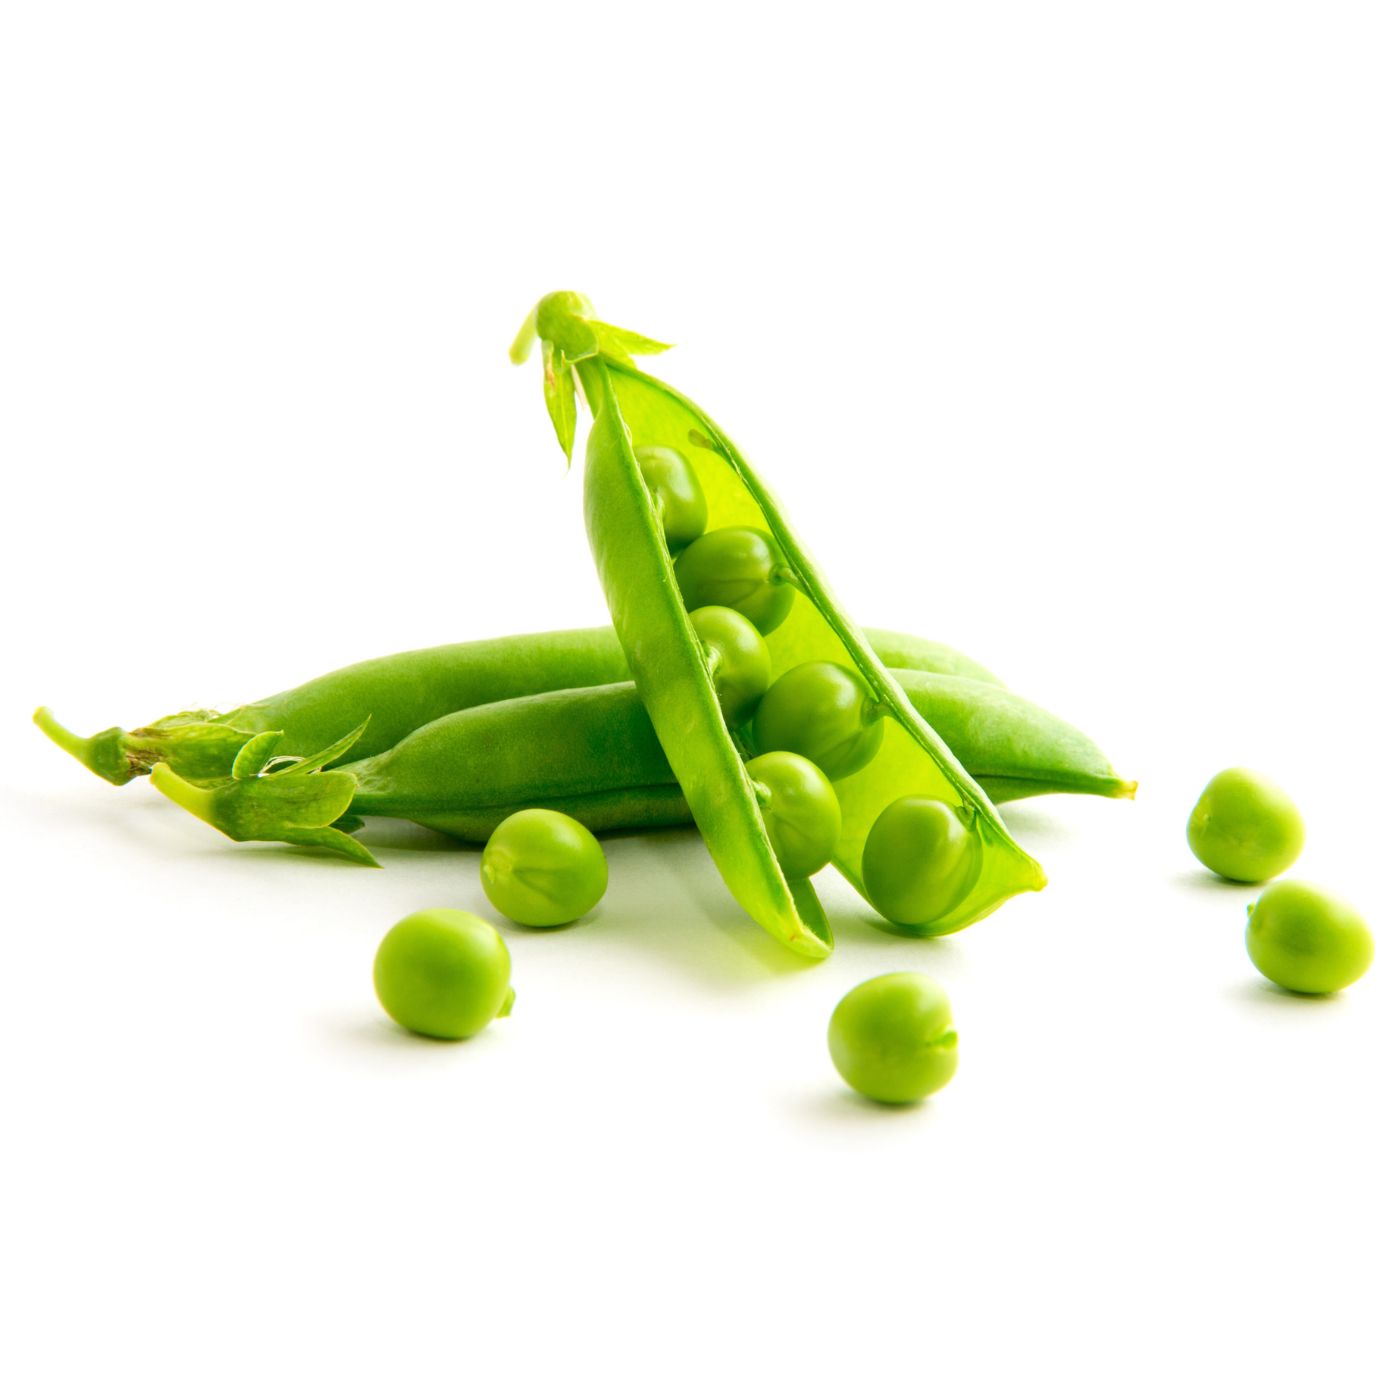 Green peas which are a main ingredient in grain free dog food